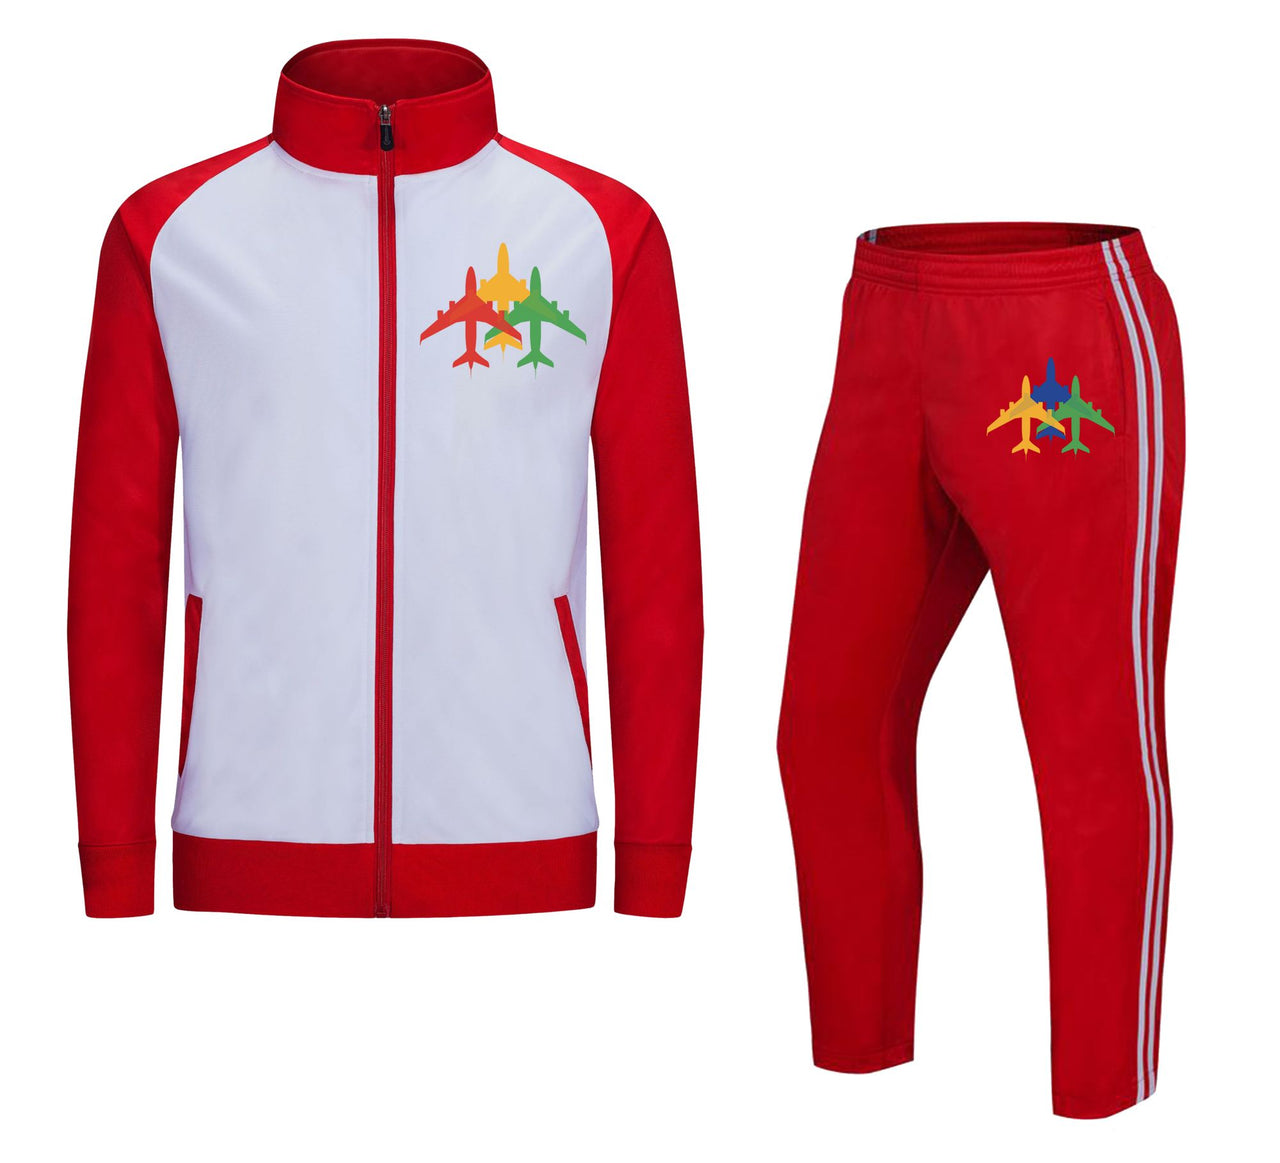 Colourful 3 Airplanes Designed "CHILDREN" Tracksuits